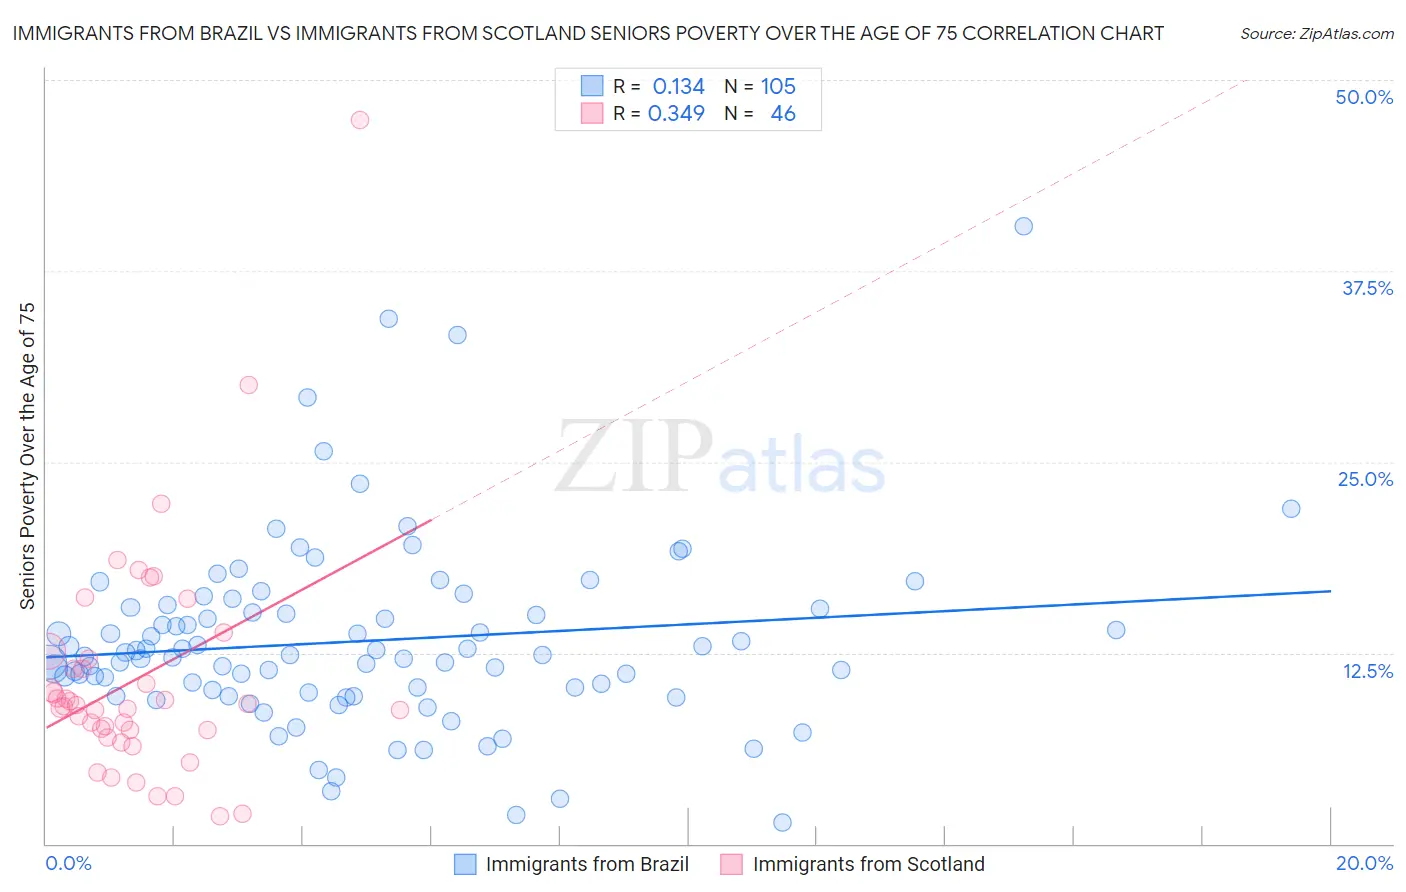 Immigrants from Brazil vs Immigrants from Scotland Seniors Poverty Over the Age of 75